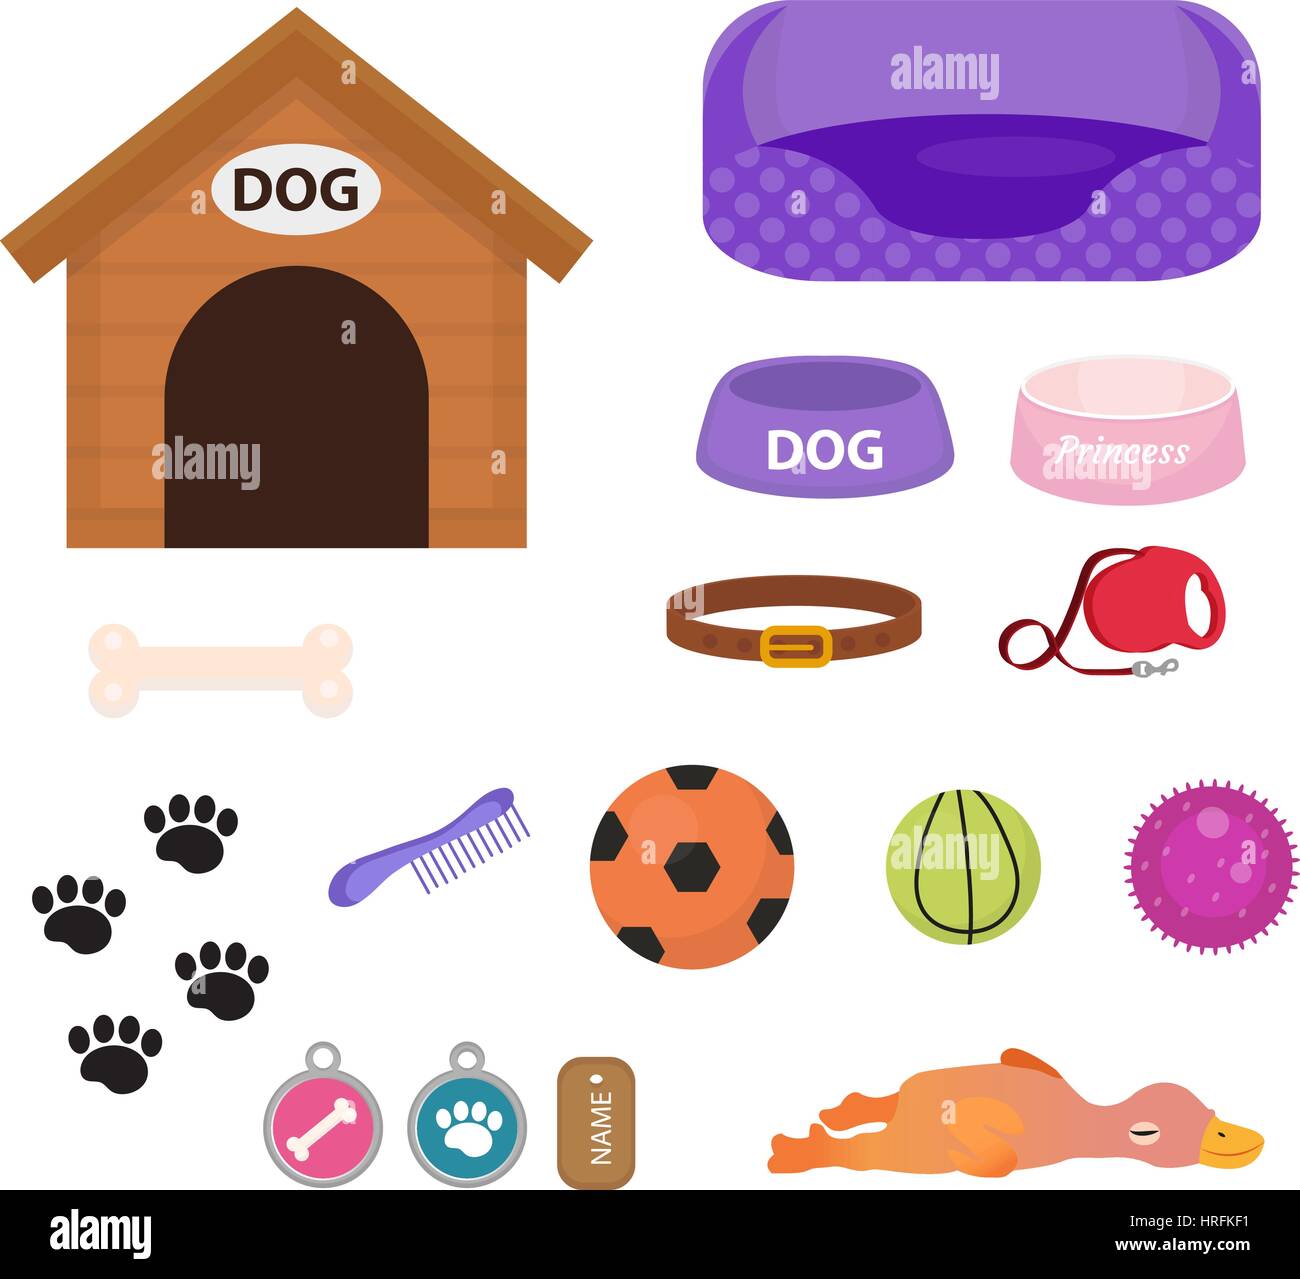 Dogs stuff icon set with accessories for pets, flat style, isolated on white background. Puppy toy. Doghouse, collar, food. Pet shop concept. Vector illustration, clip art. Stock Vector